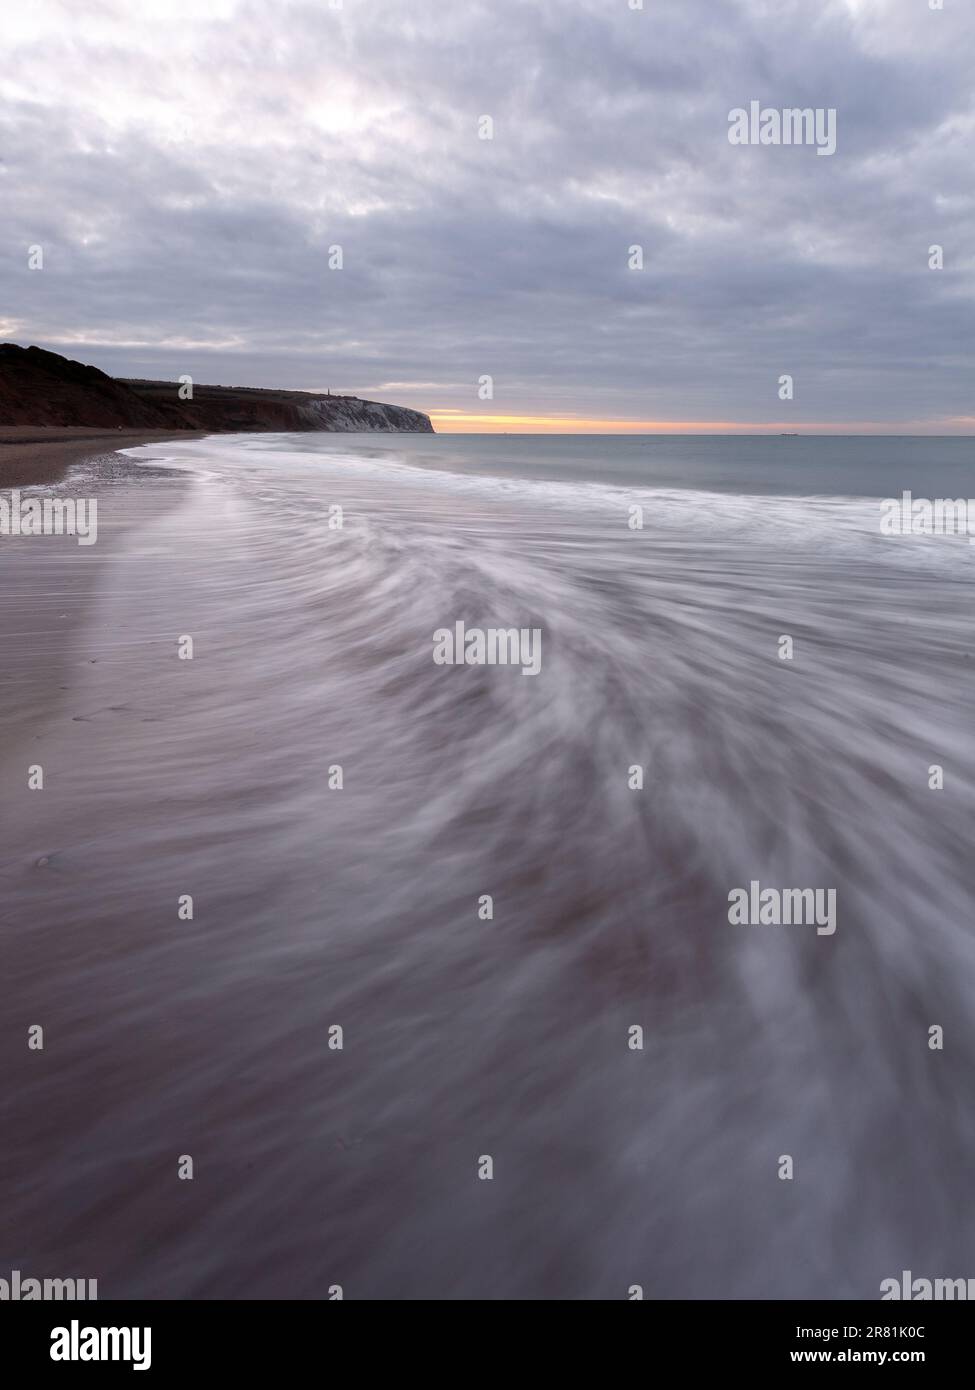 Isle of Wight Seascapes: Embracing the Ebb and Flow of Nature's Sunrise and Sunset Spectacles Stock Photo